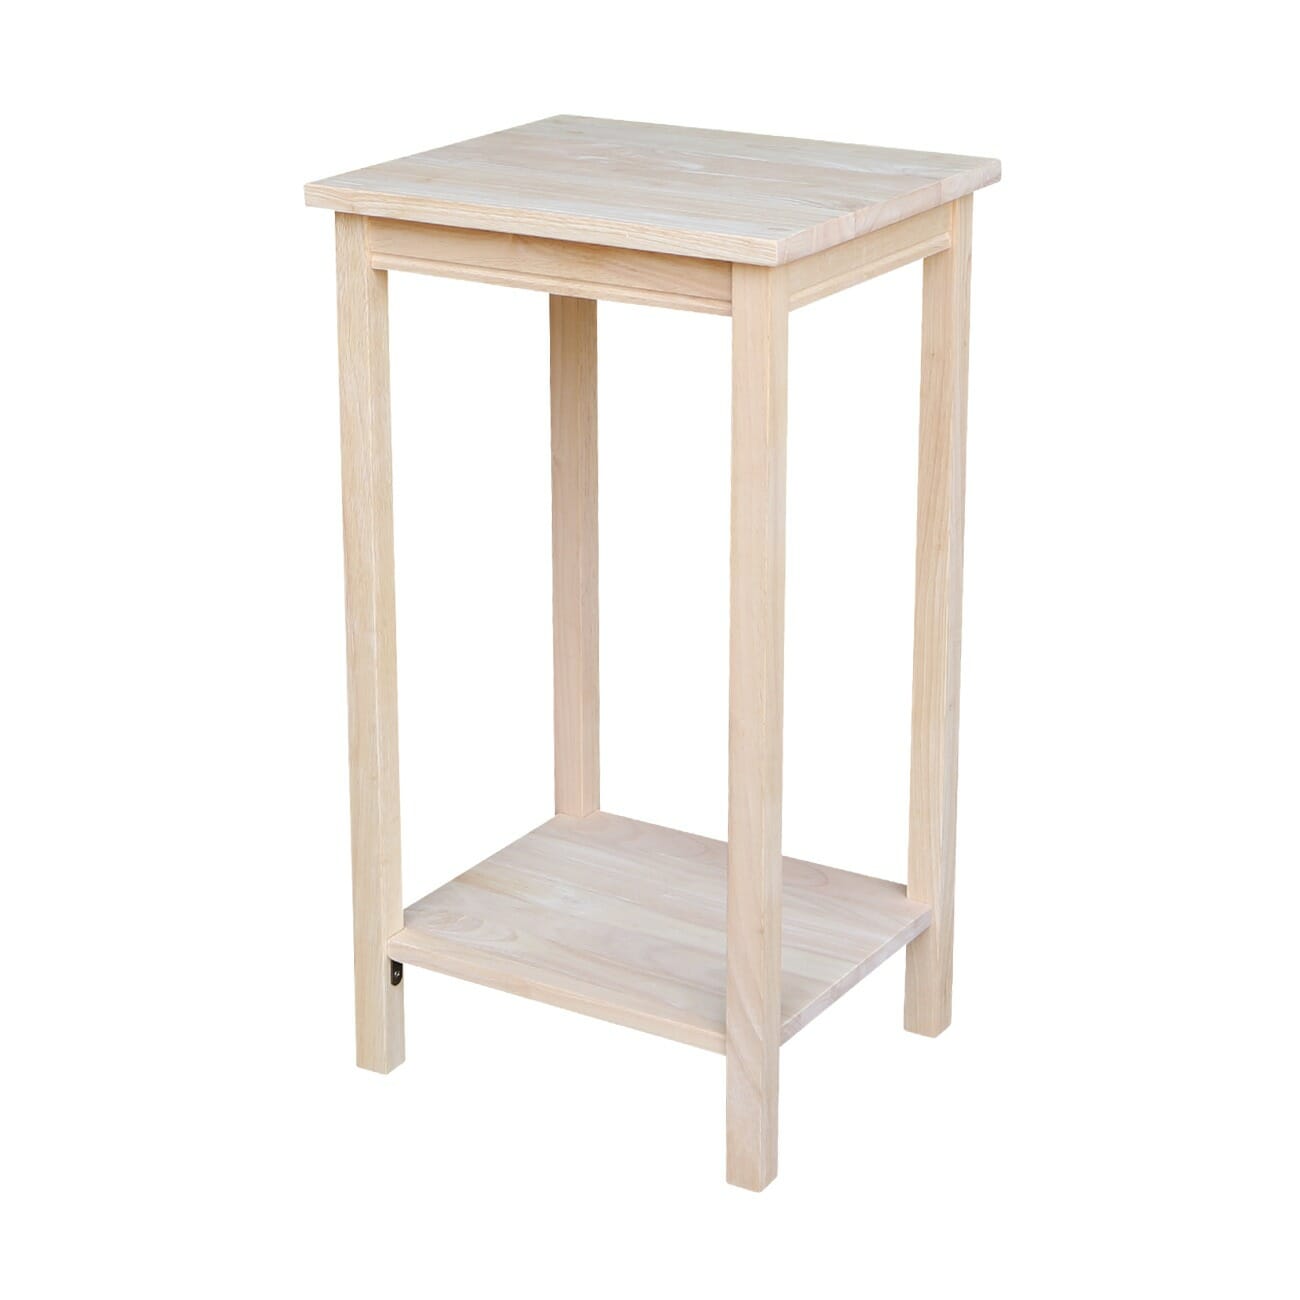 29 Inch Tall Side Table With Drawers Hotsell, 57% OFF | www 